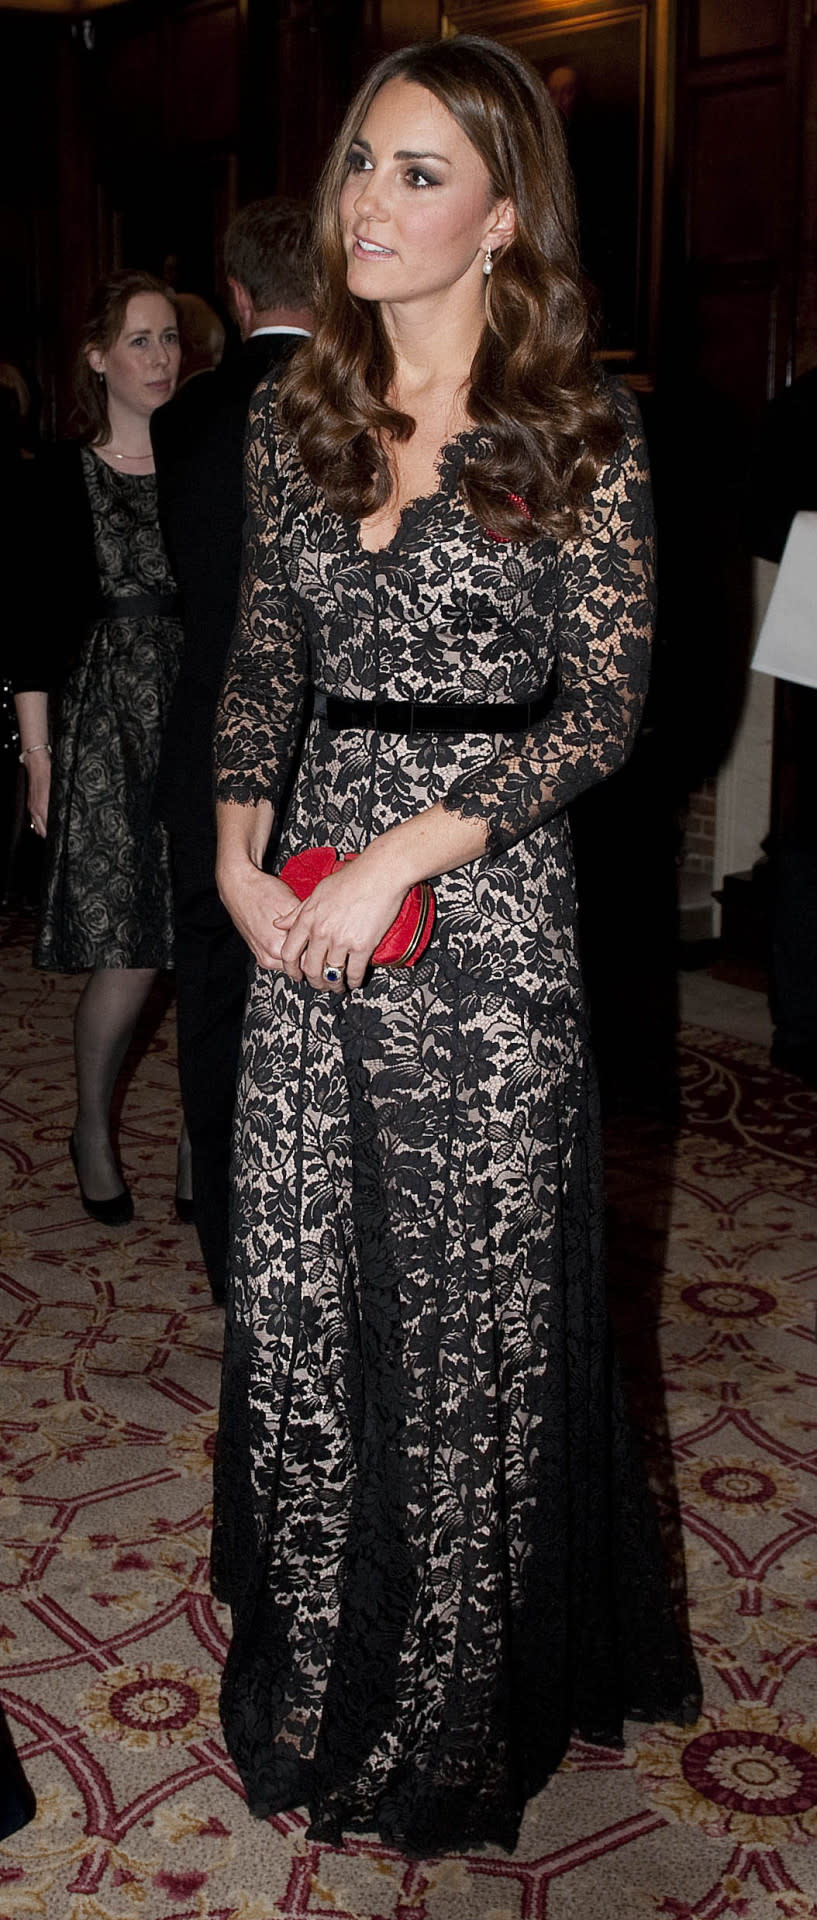 <p>The Duchess went back to St Andrews University for a dinner wearing a gorgeous nude-and-black lace gown by Temperley London. She carried a red Alexander McQueen box clutch and finished with suede Jimmy Choos.</p><p><i>[Photo: PA]</i></p>